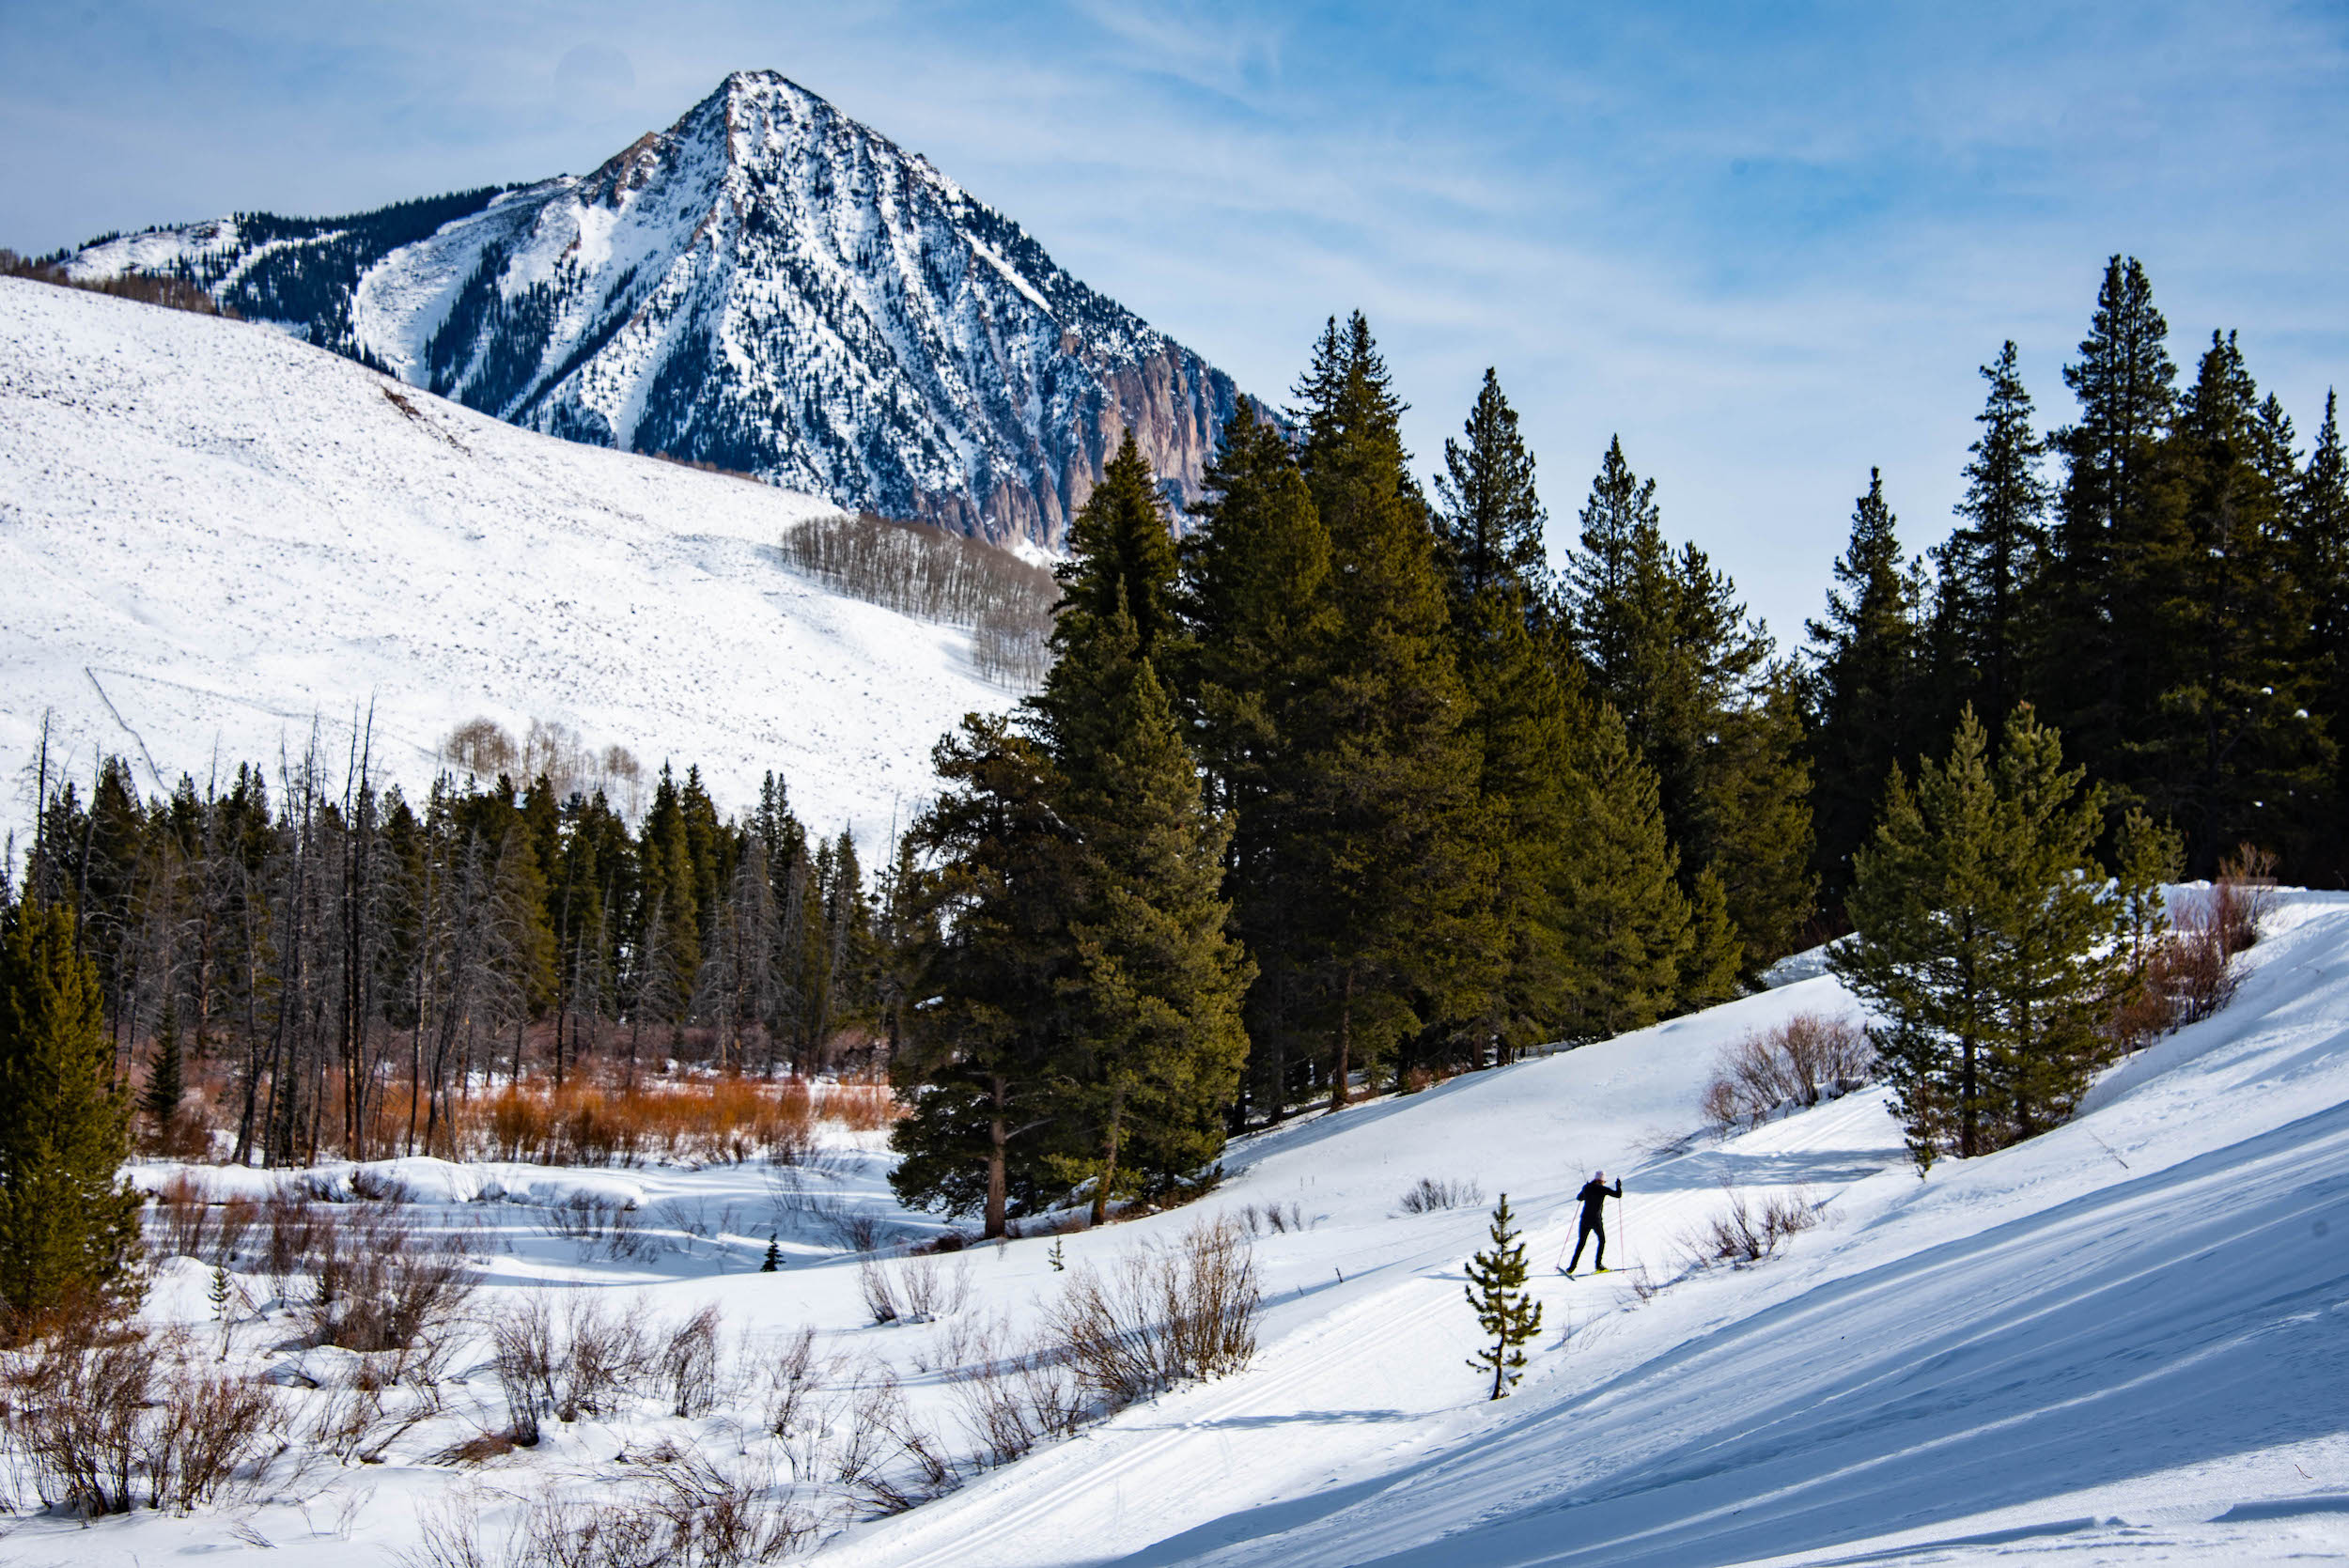 a skier on a groomed Nordic skiing track in a wooded area with a pointy mountain peak in the background